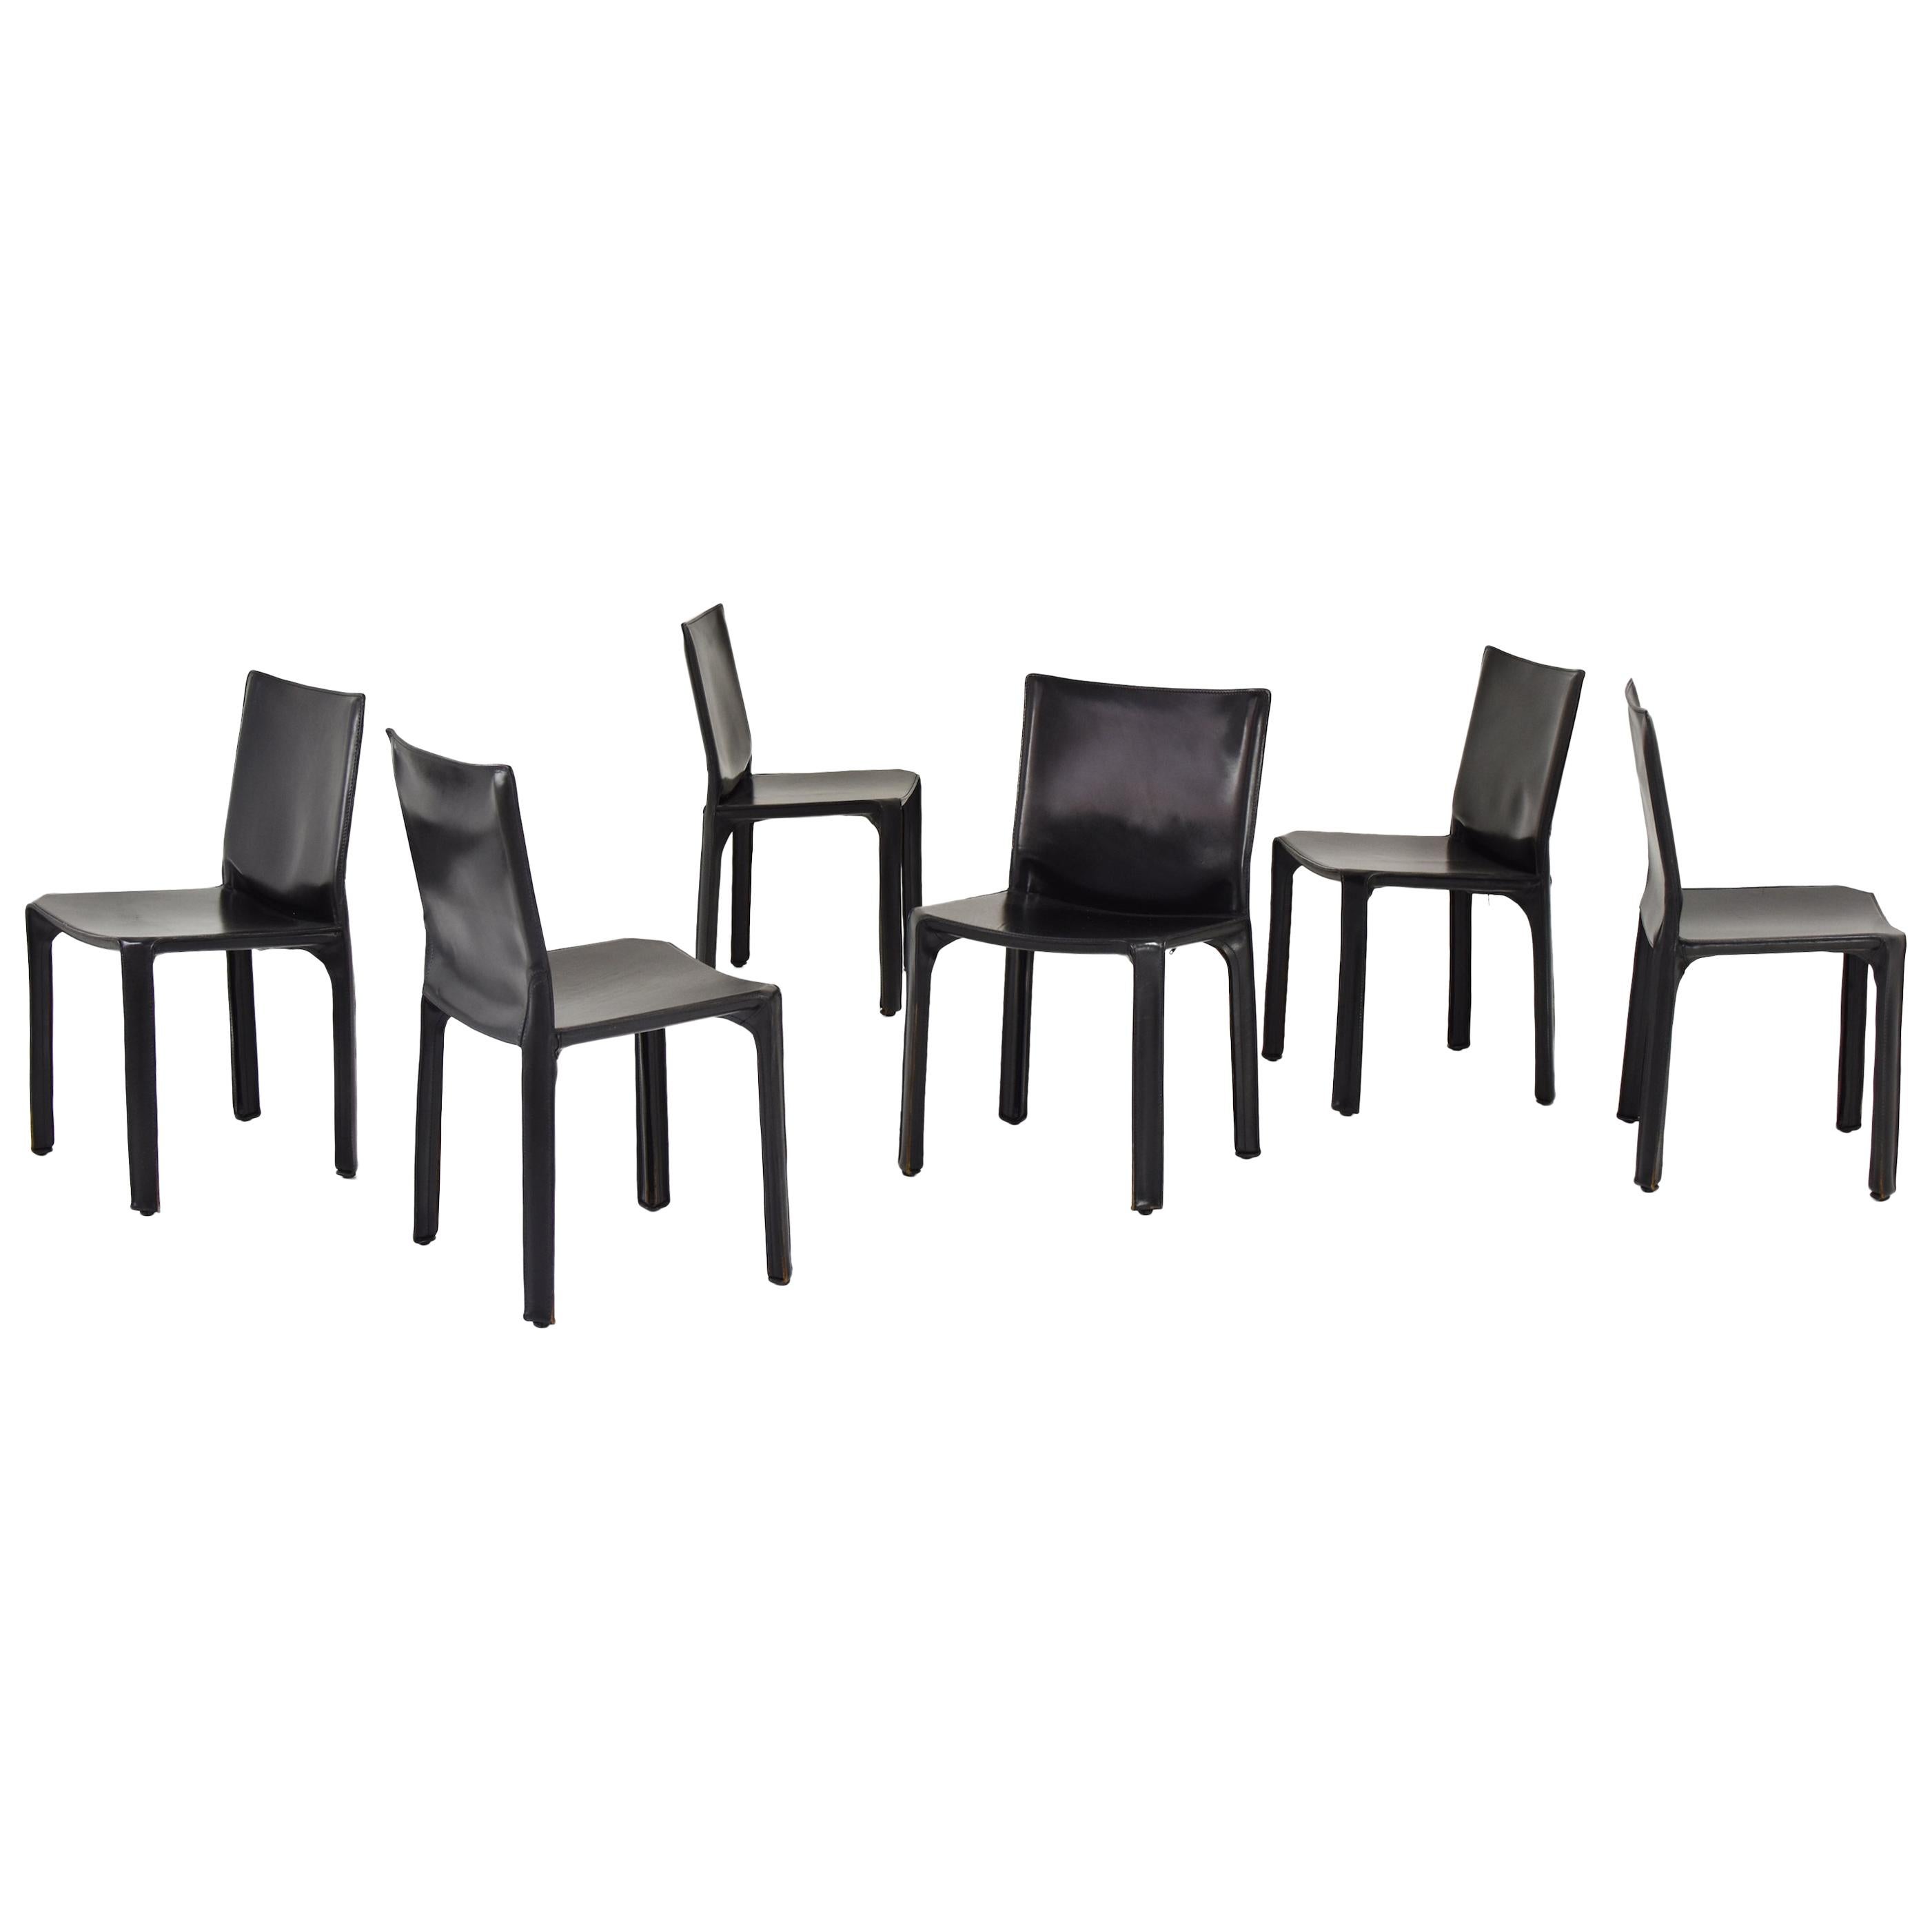 Set of 6 “413” CAB Chairs by Mario Bellini for Cassina, Italy, 1977